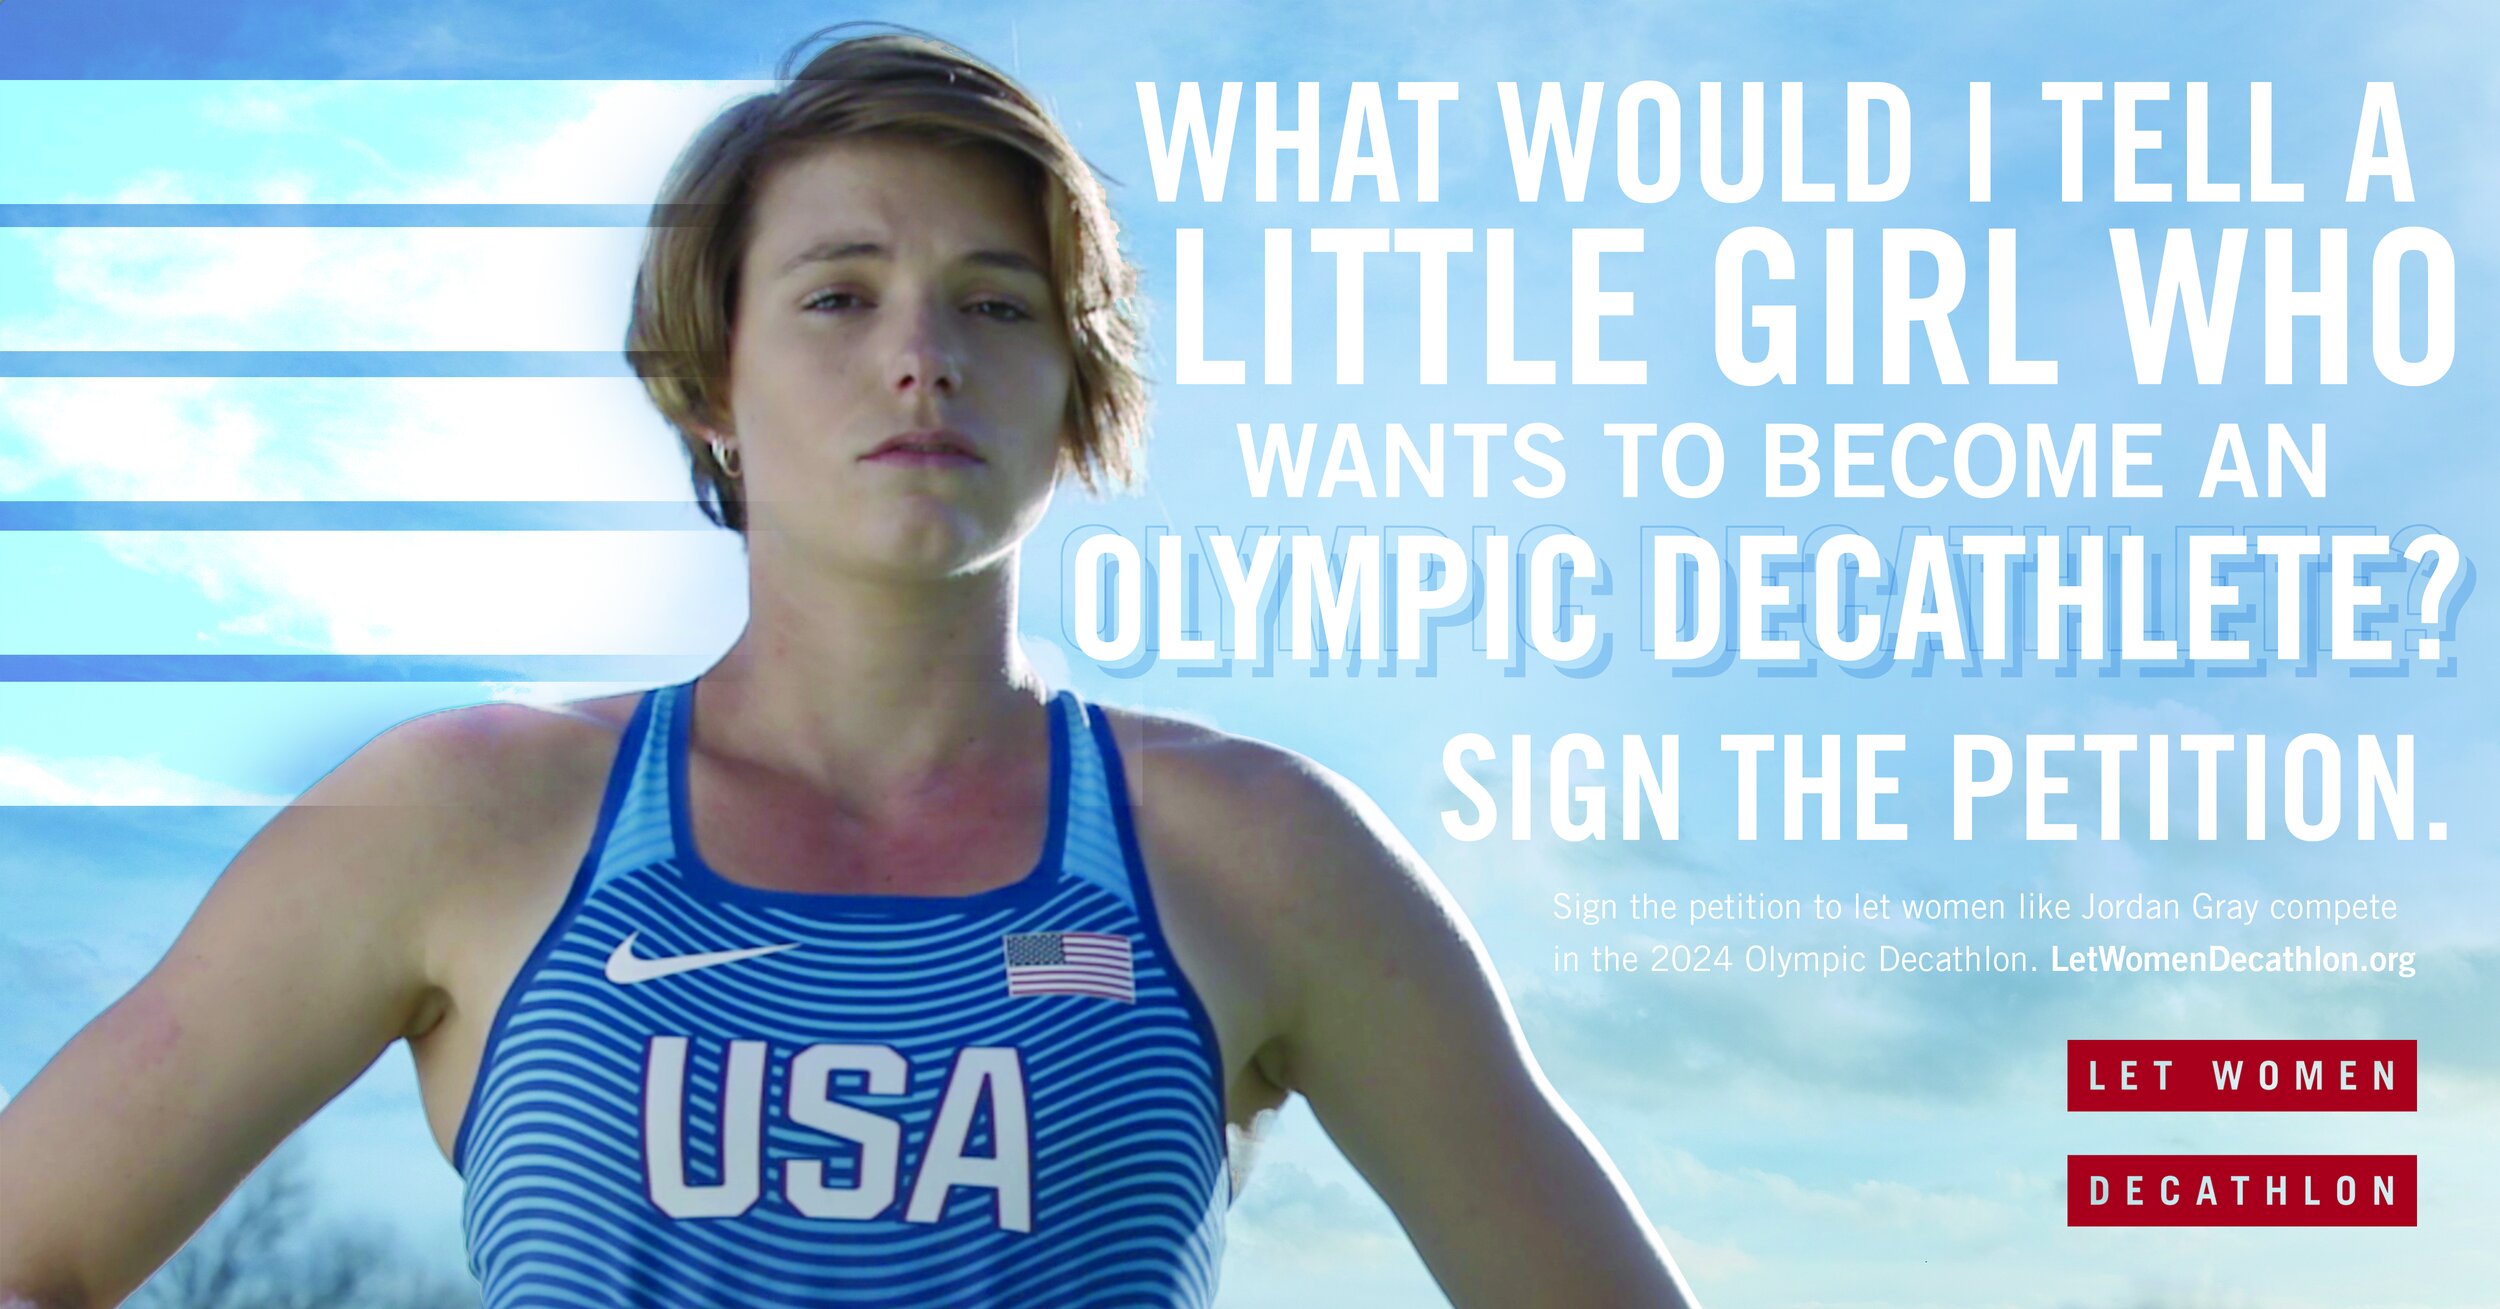 News about Jordan Gray and the petition — Let Women Decathlon